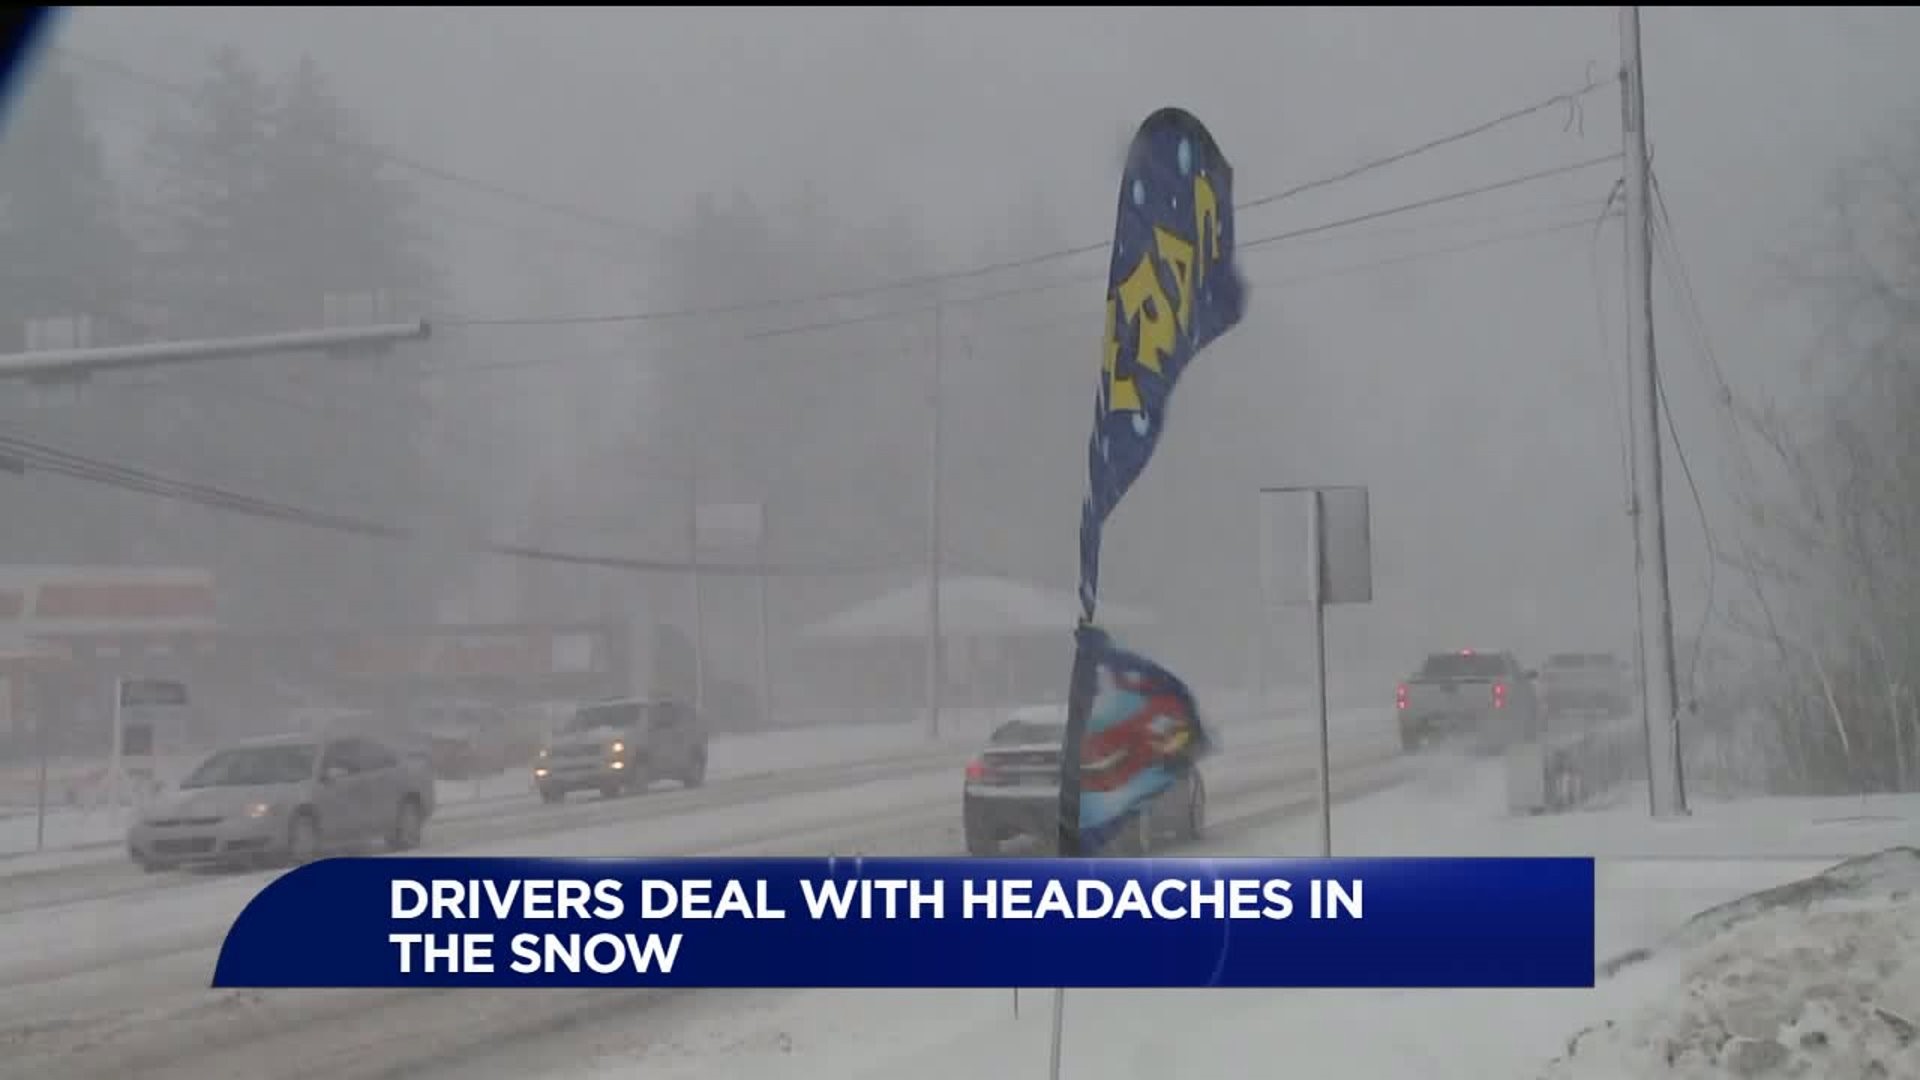 A Snow Day in Luzerne County